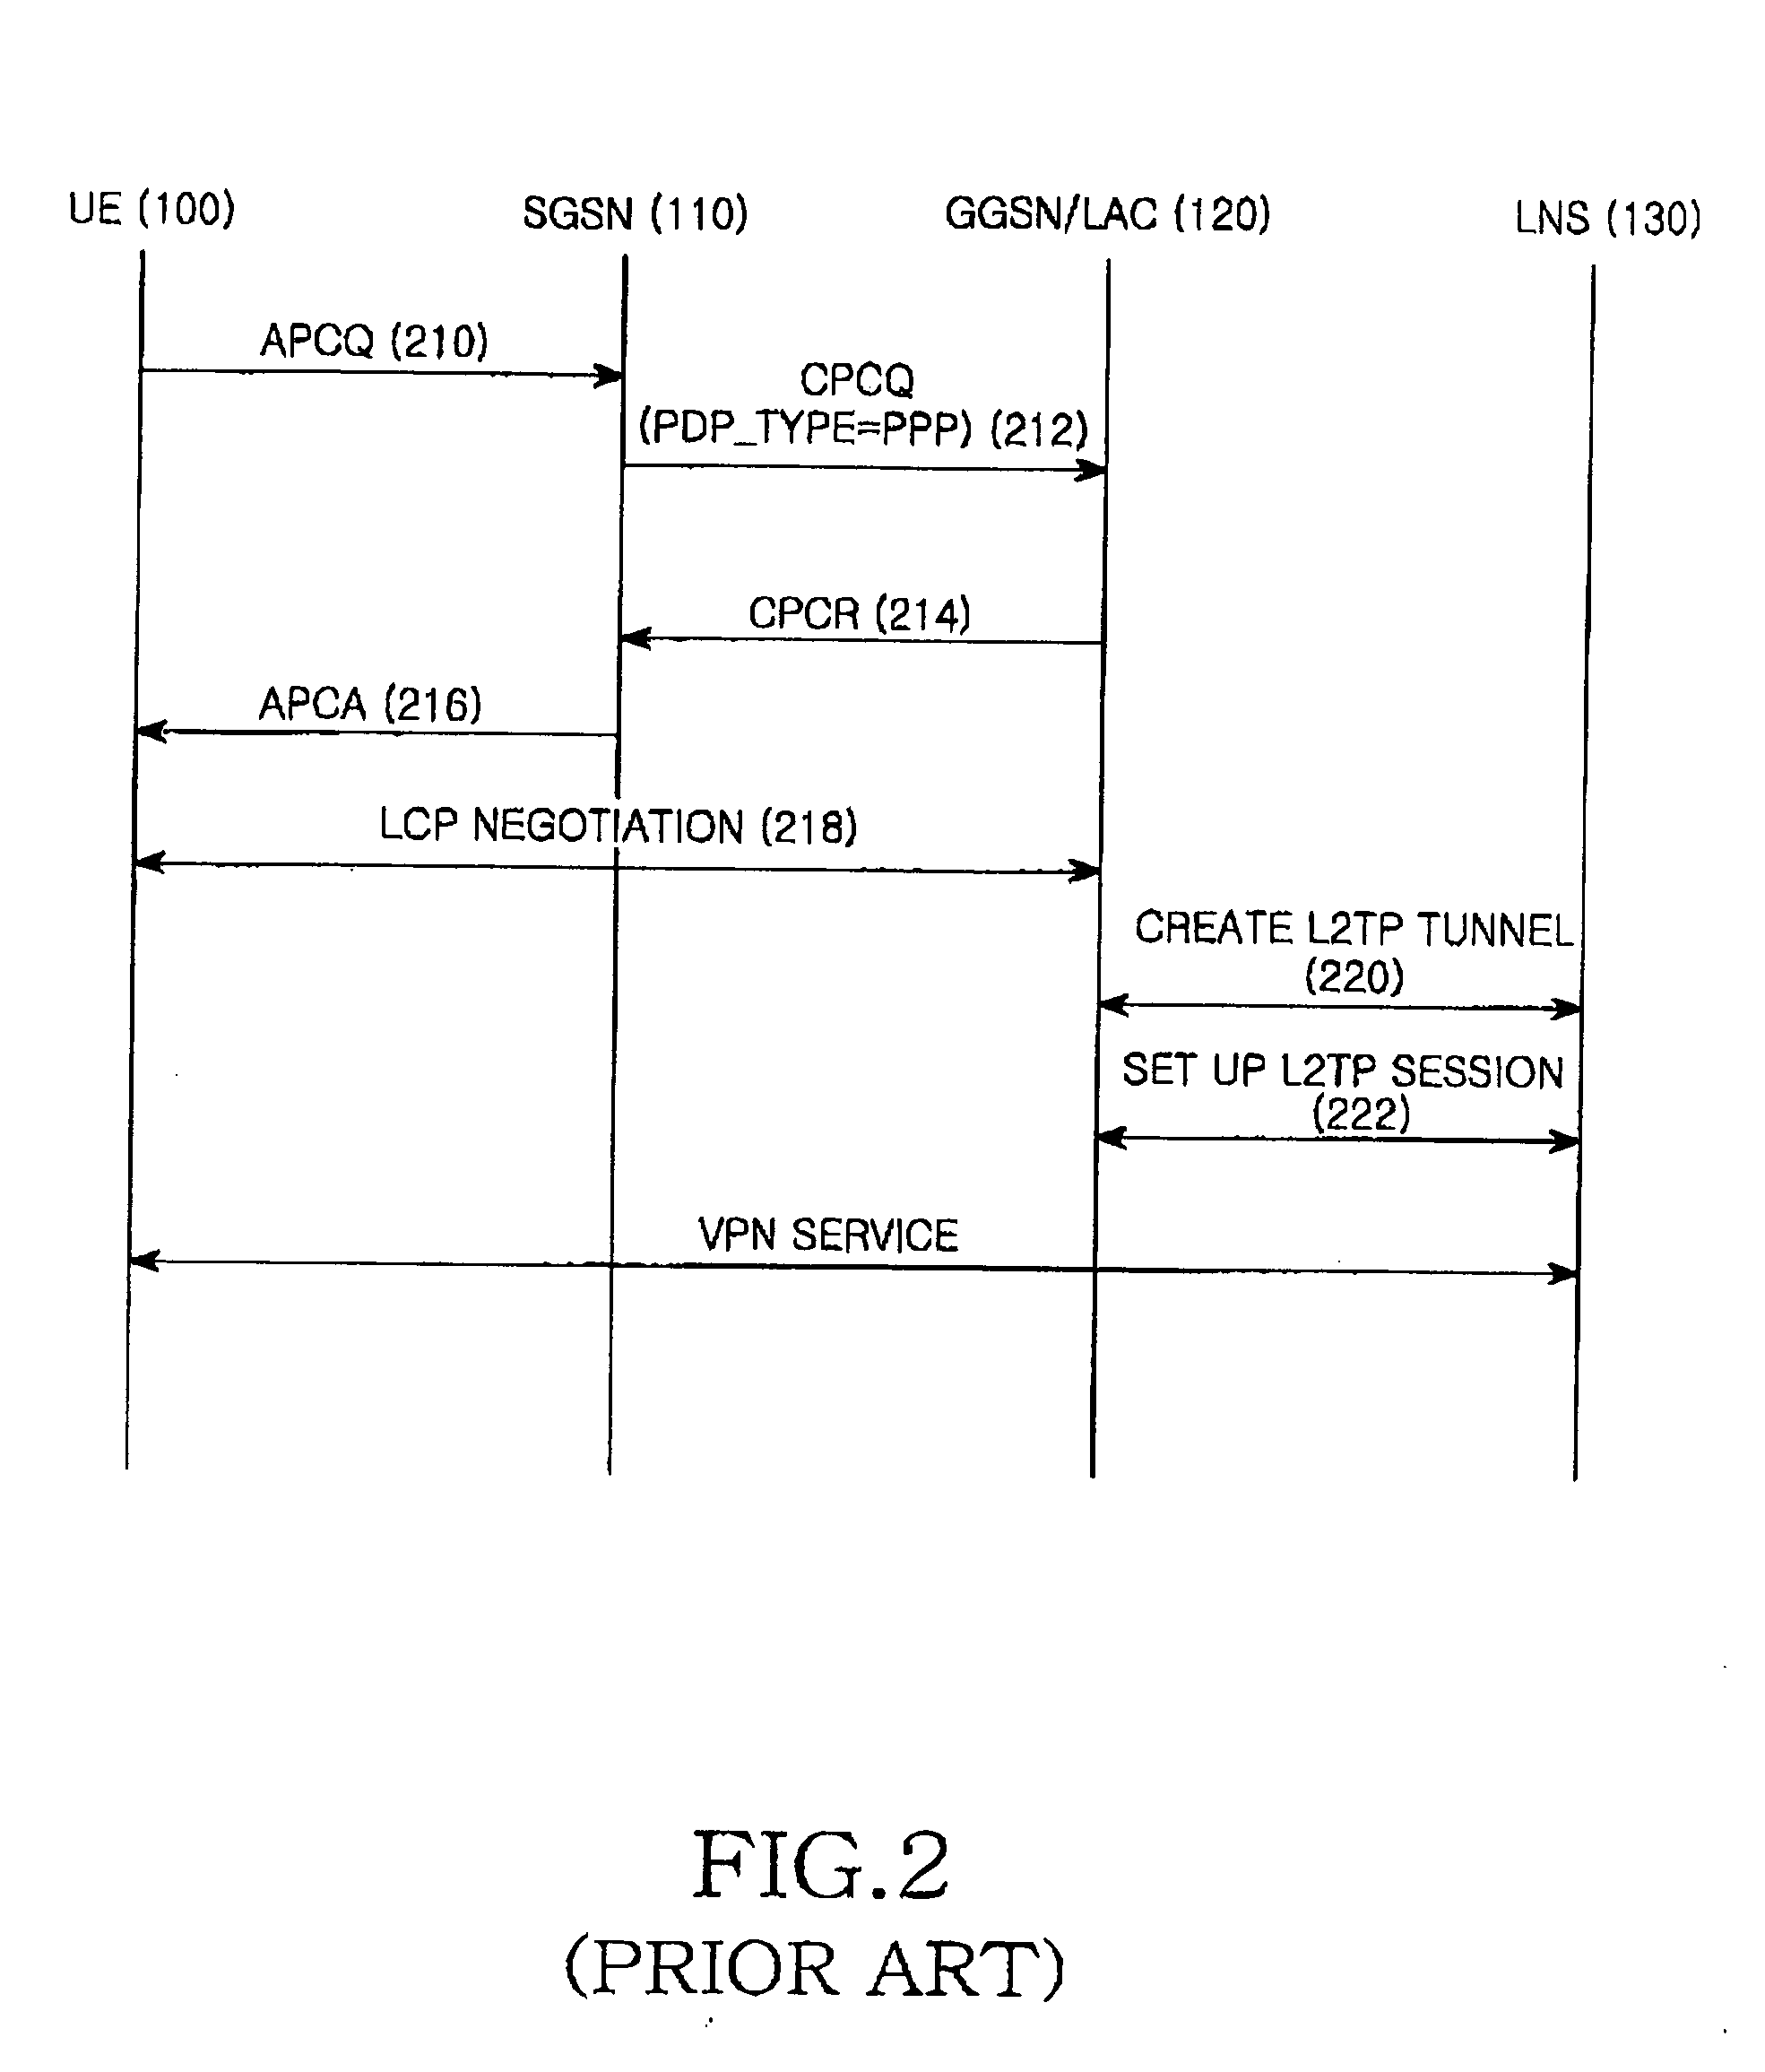 Method and apparatus for providing a VPN service according to a packet data protocol in a wireless communication system